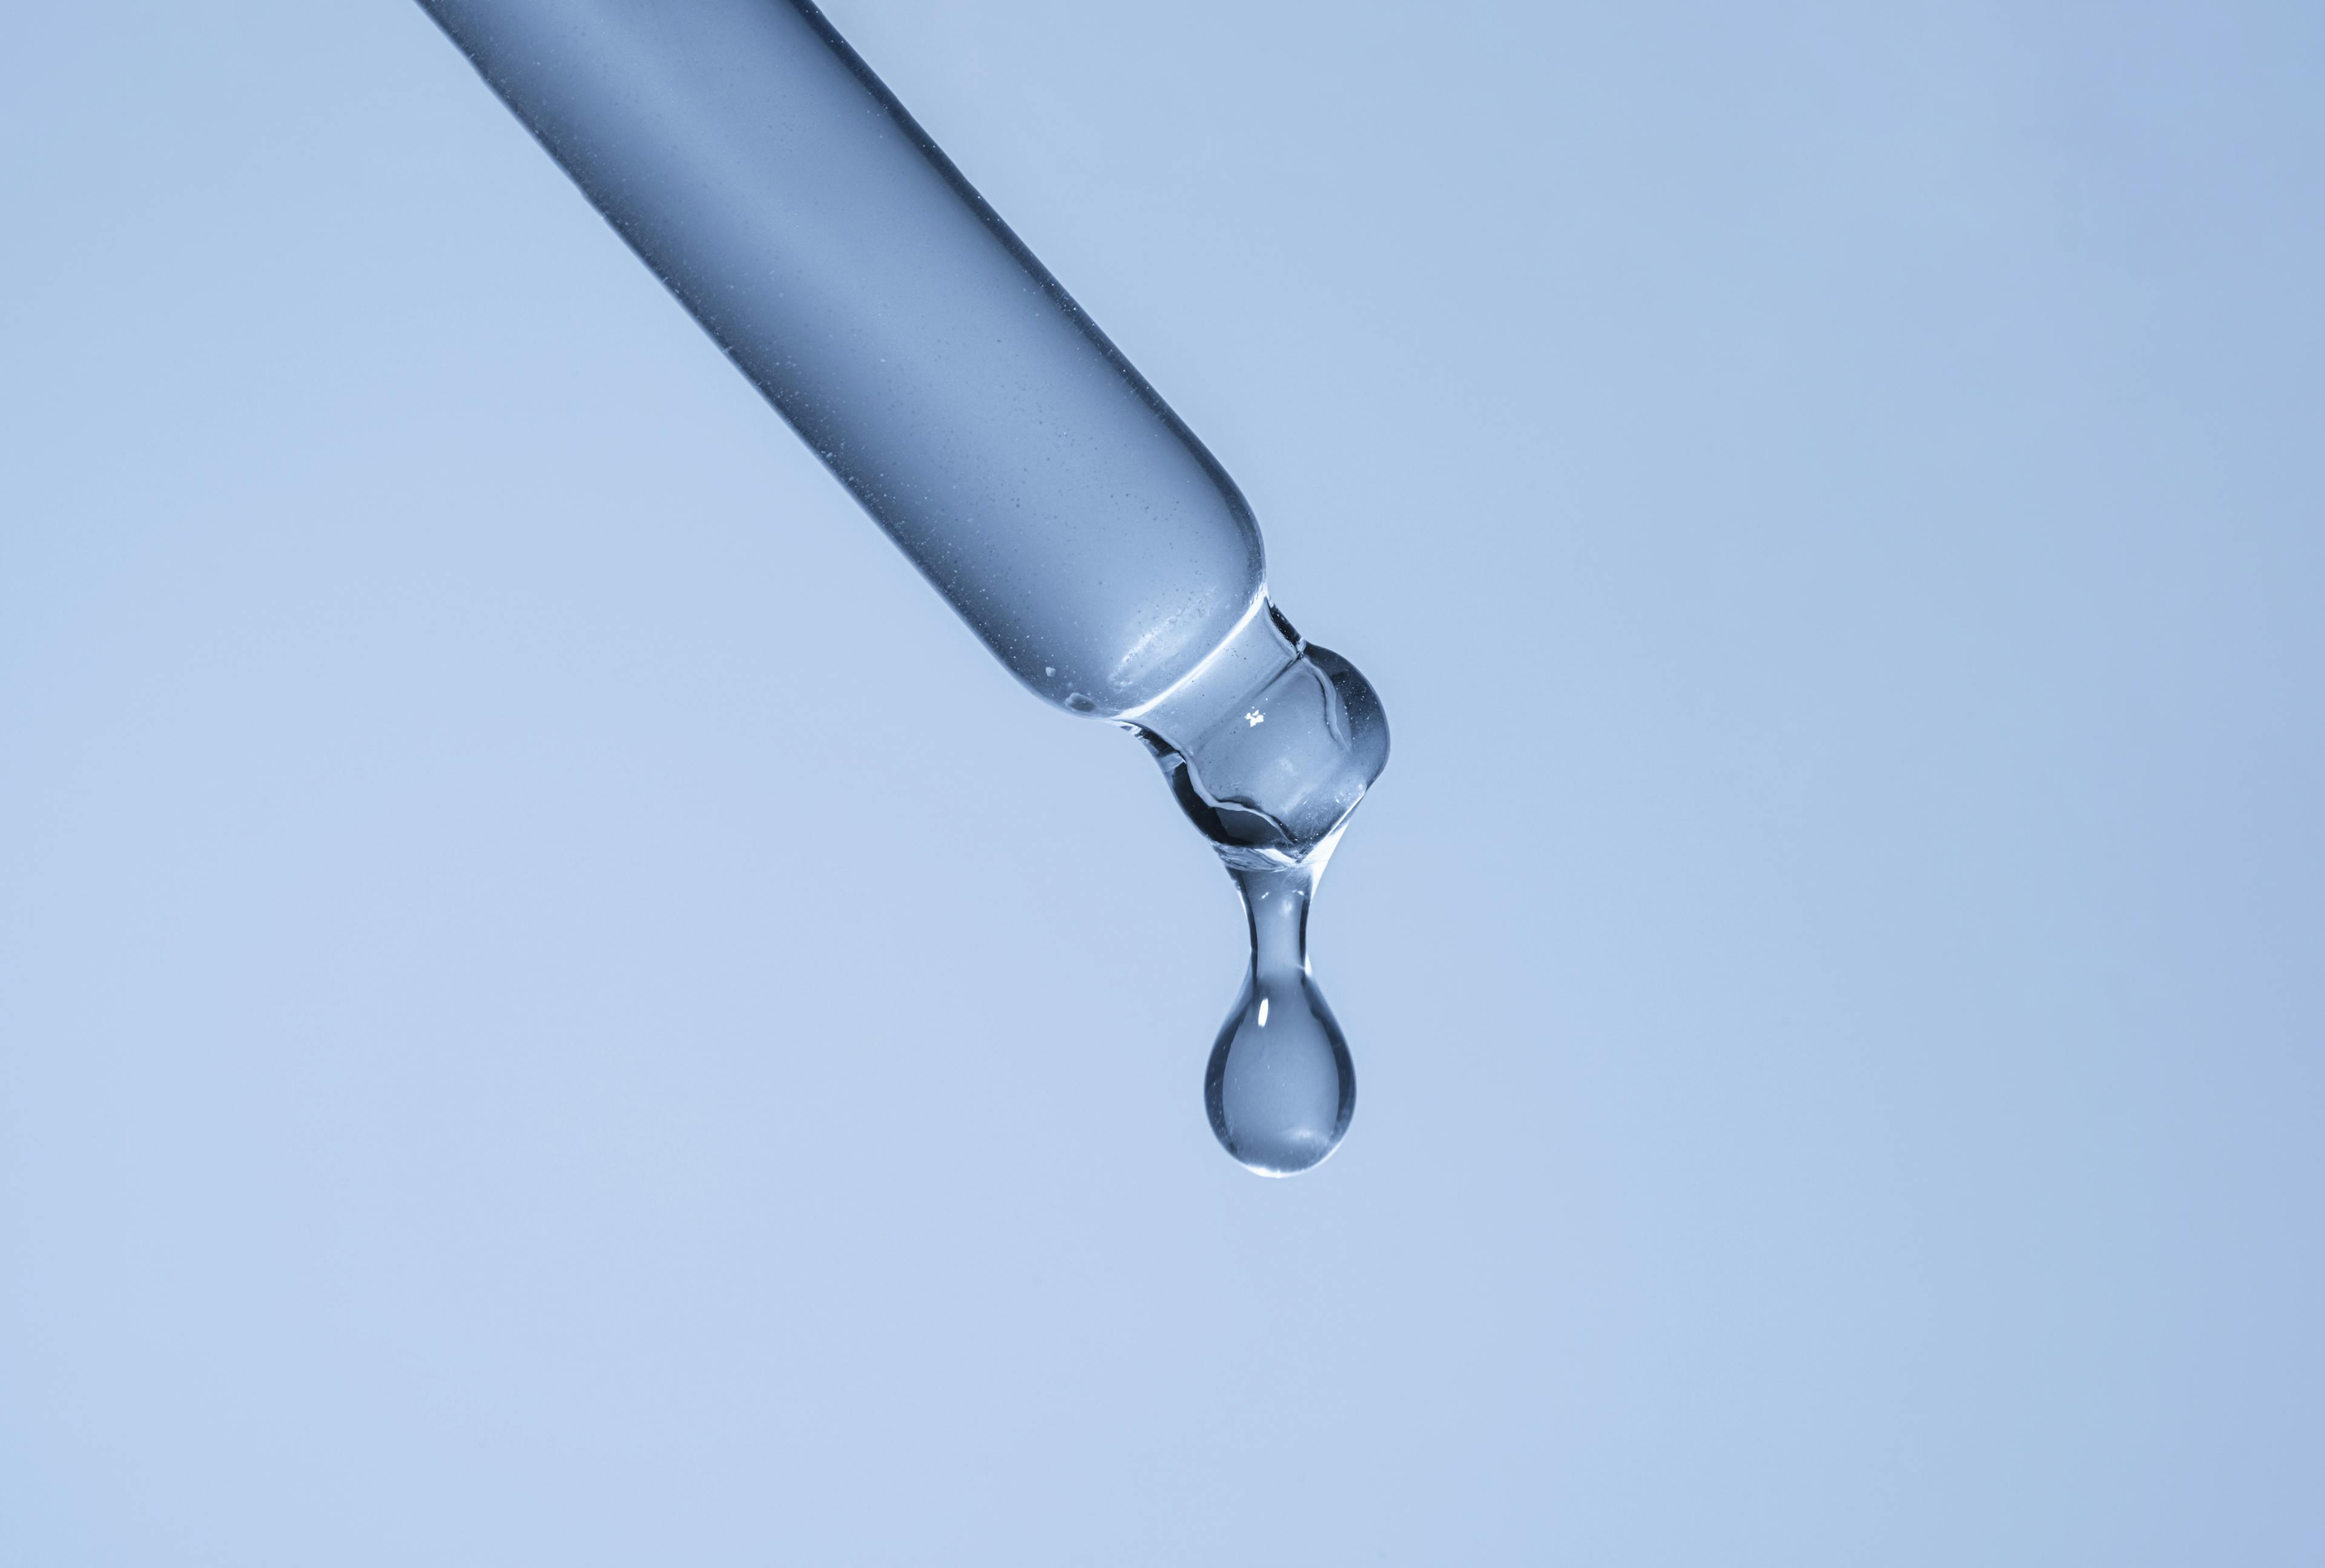 Liquid being dropped from a dropper on a light blue background